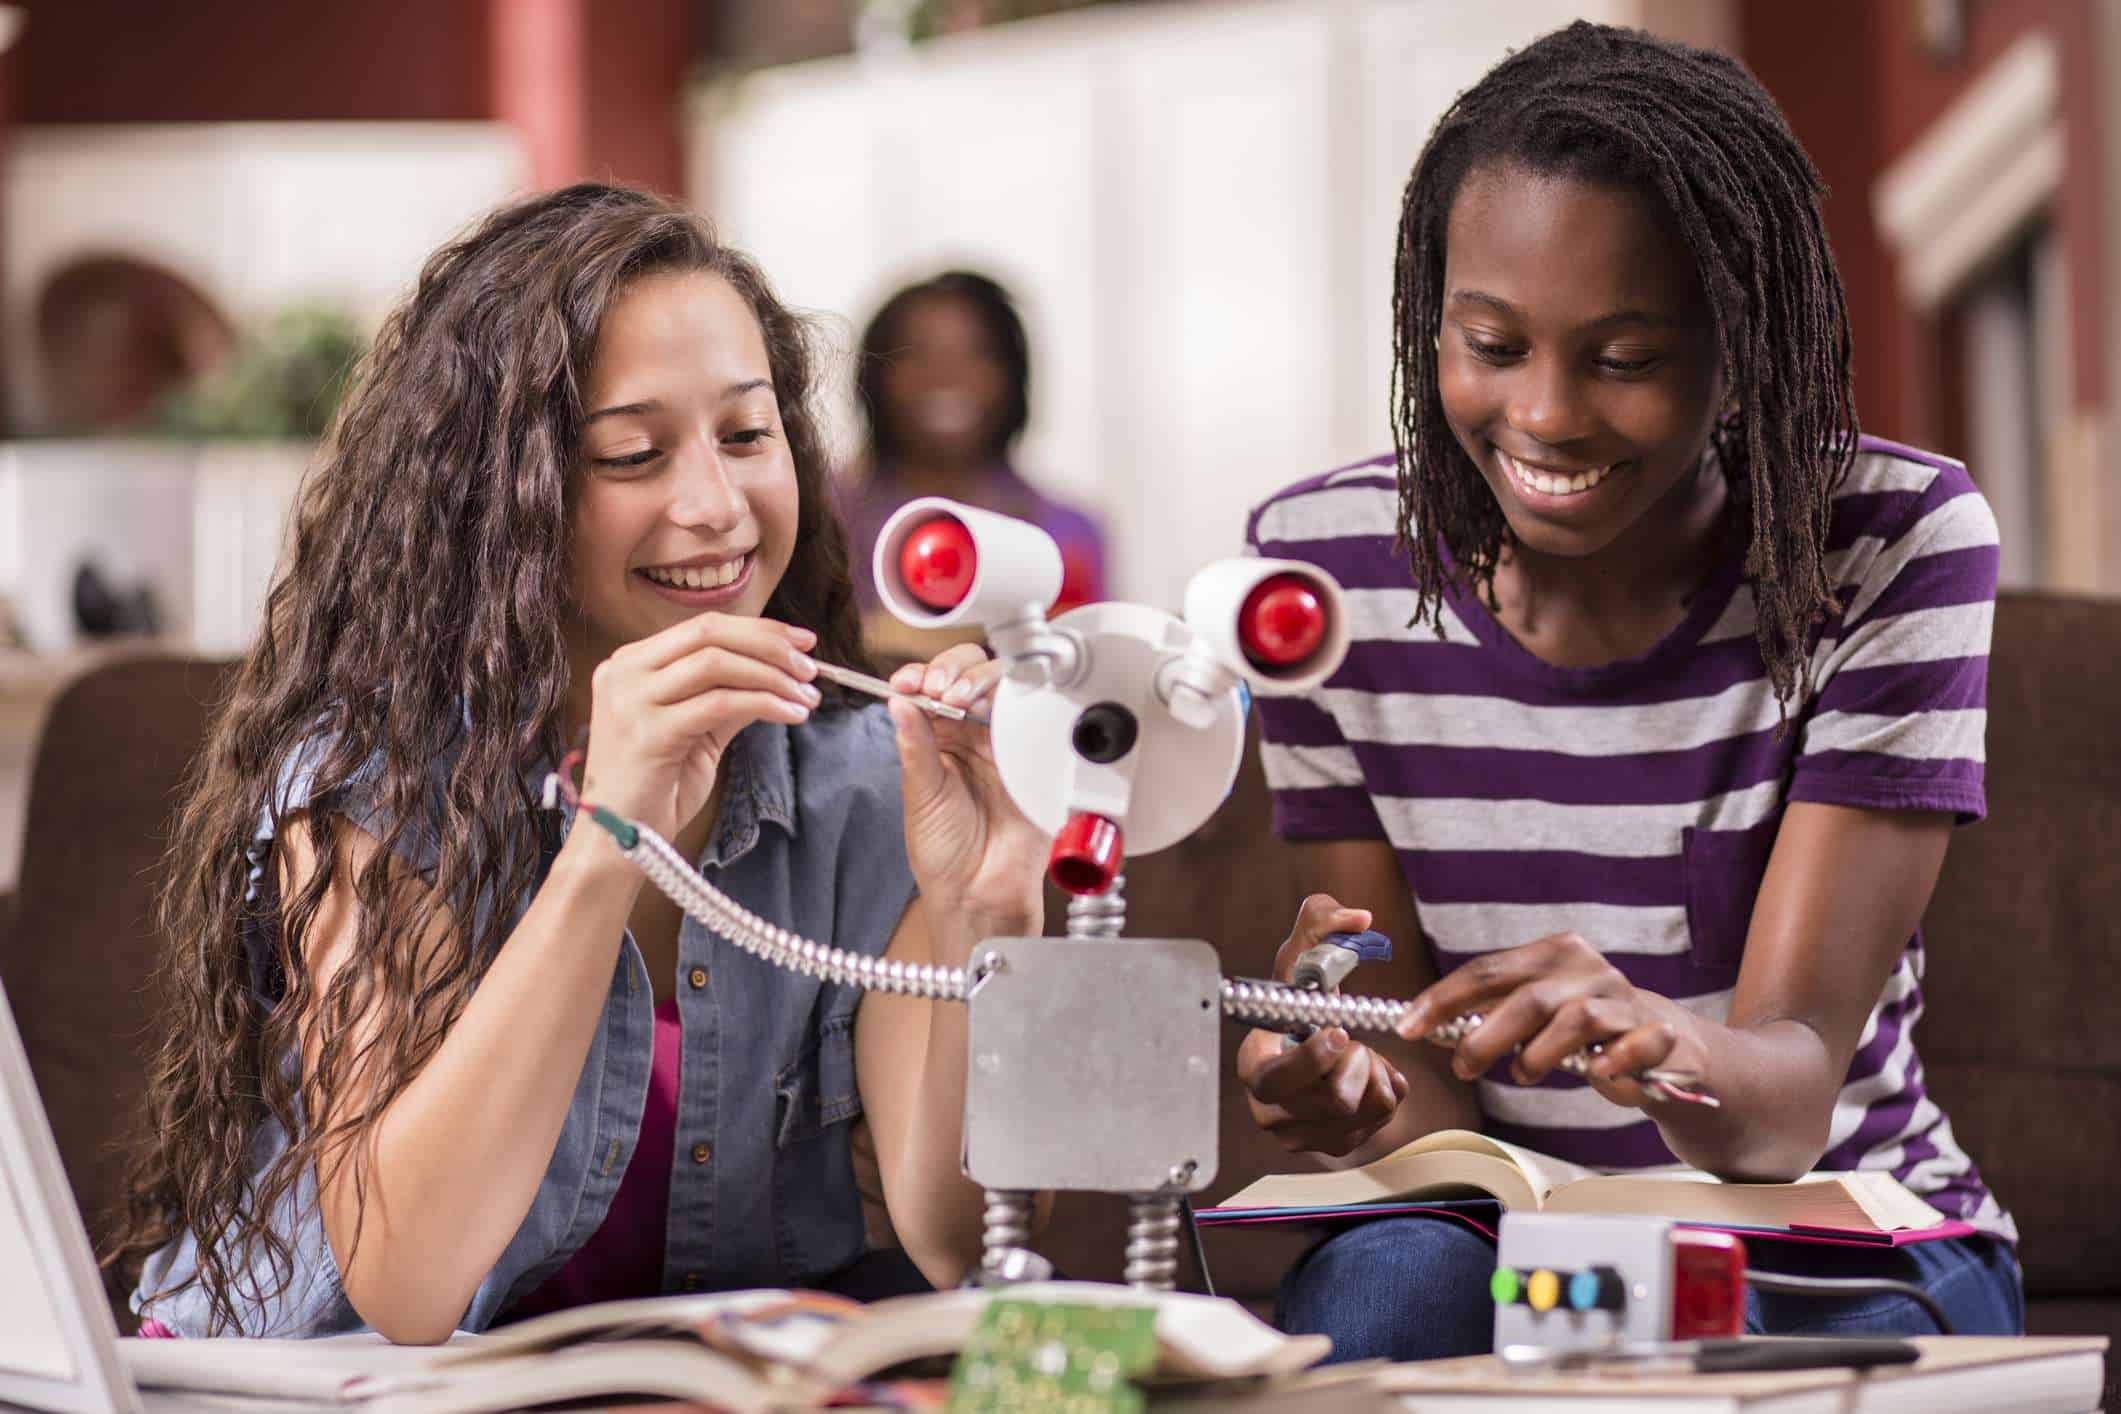 Girls learning about engineering, science, robotics, STEM, and STEAM